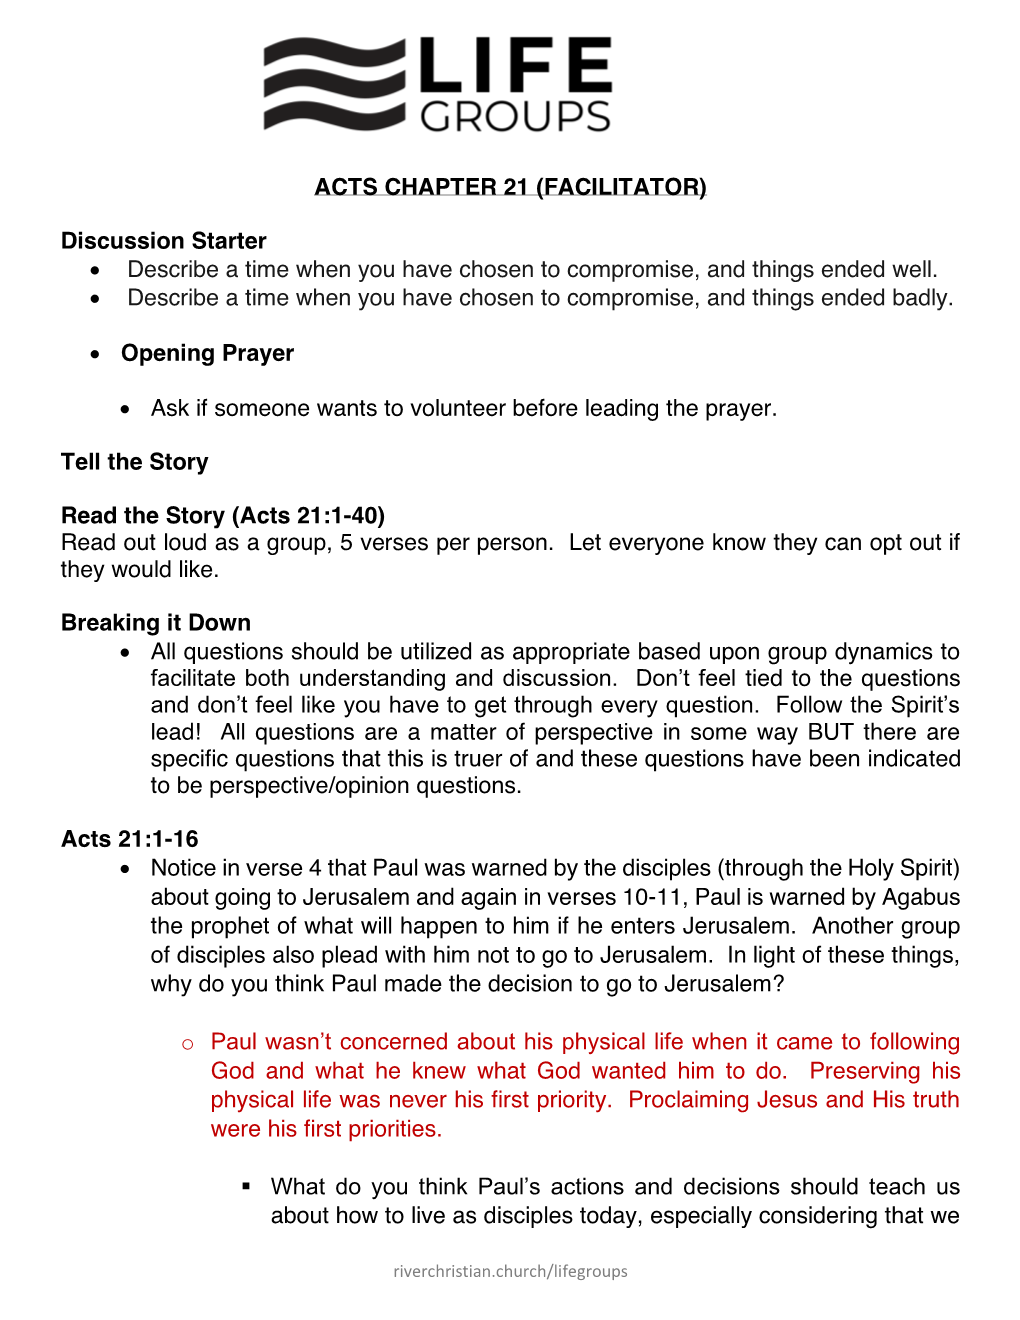 Acts Chapter 21 (Facilitator)